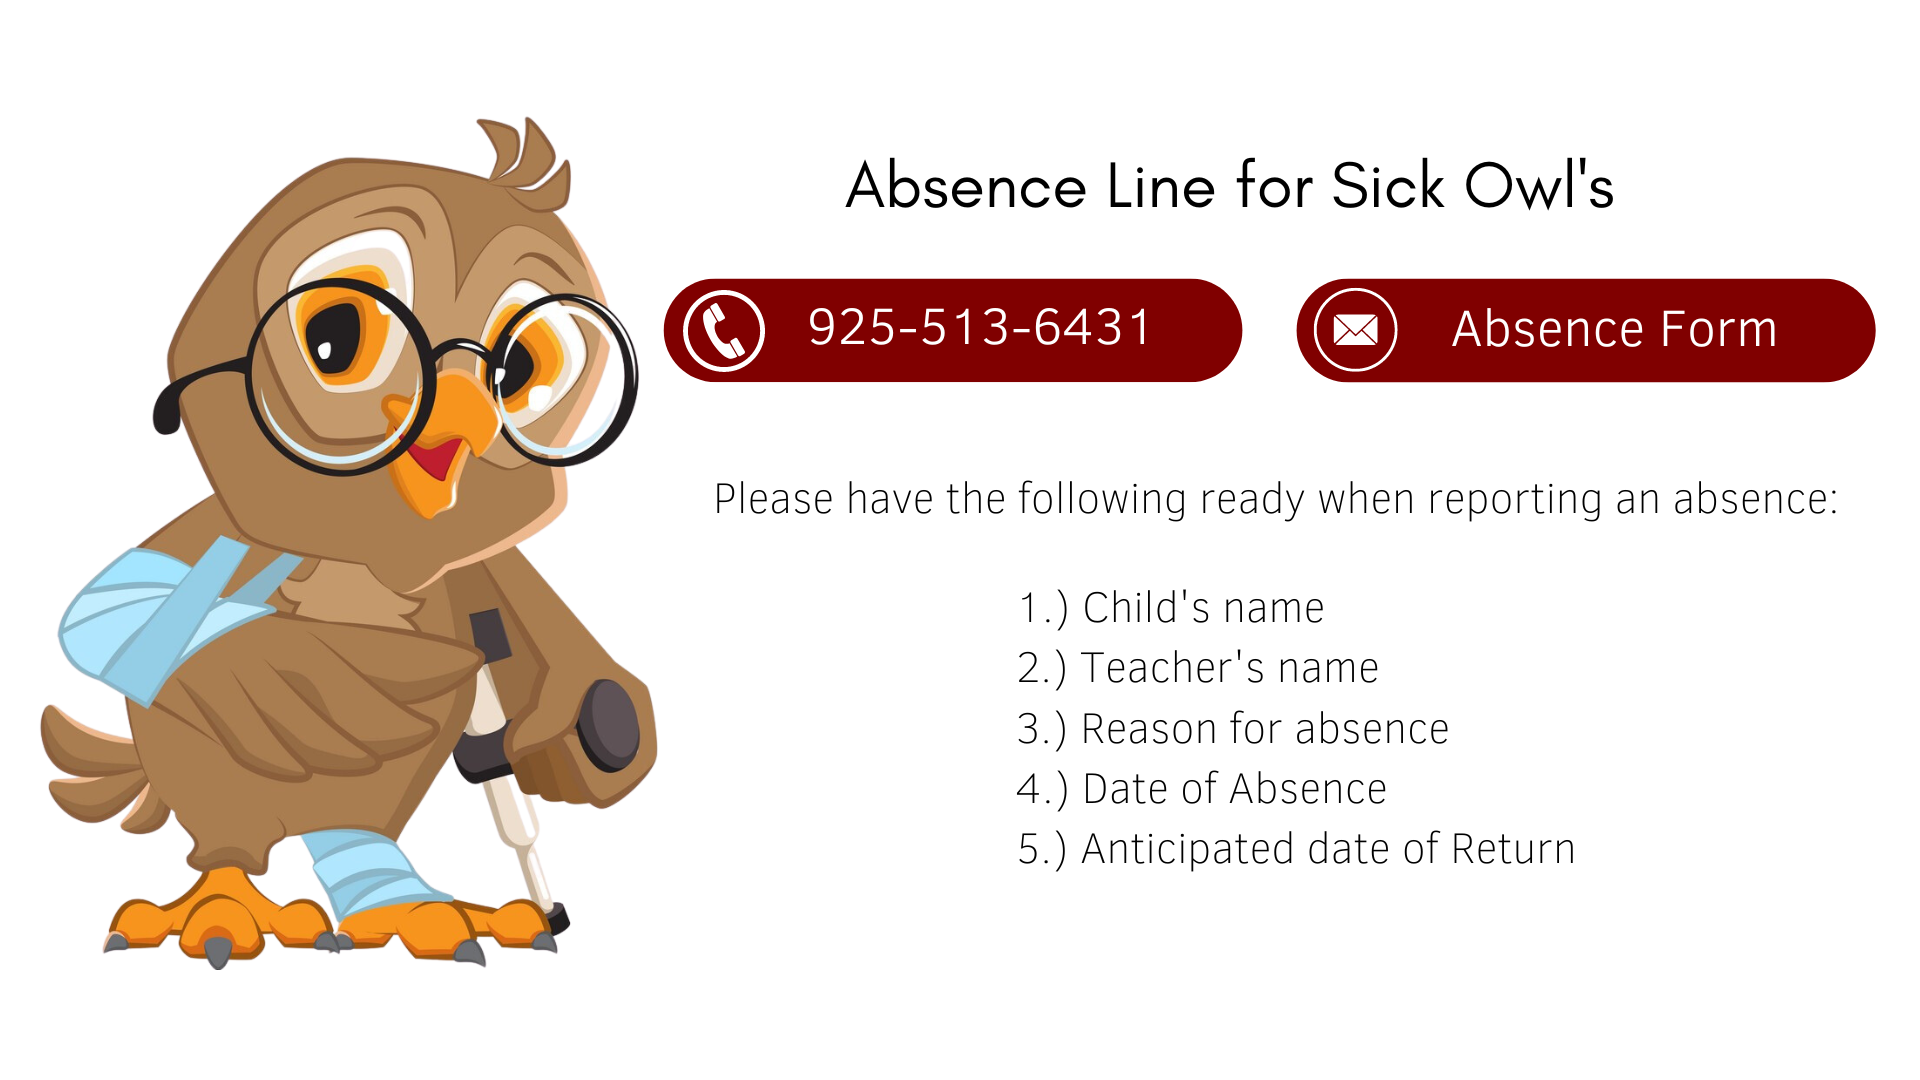 Absence Line